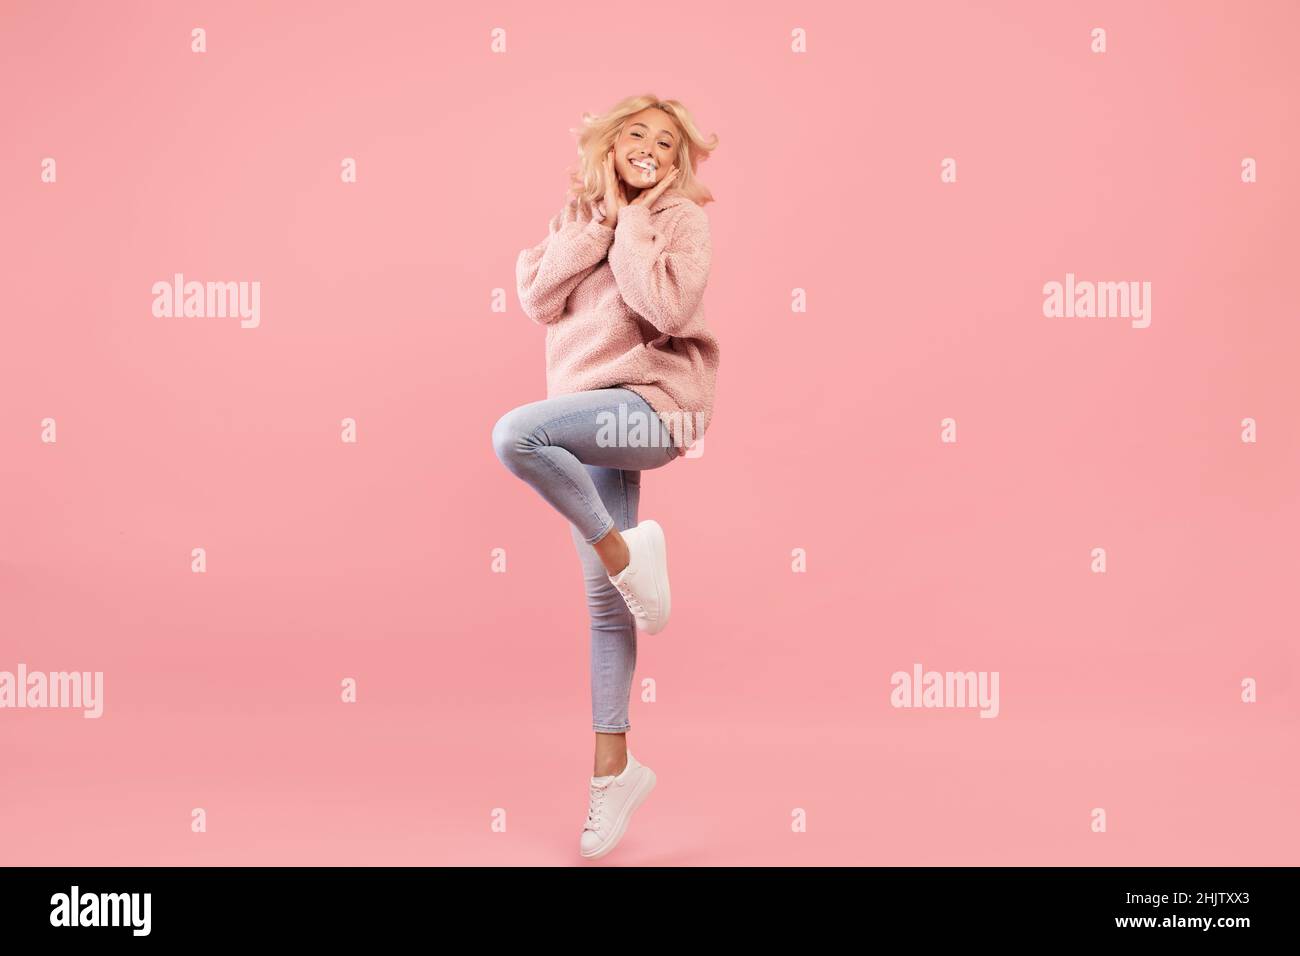 Full body length portrait of playful woman jumping, having fun and smiling at camera, pink background, studio shot Stock Photo